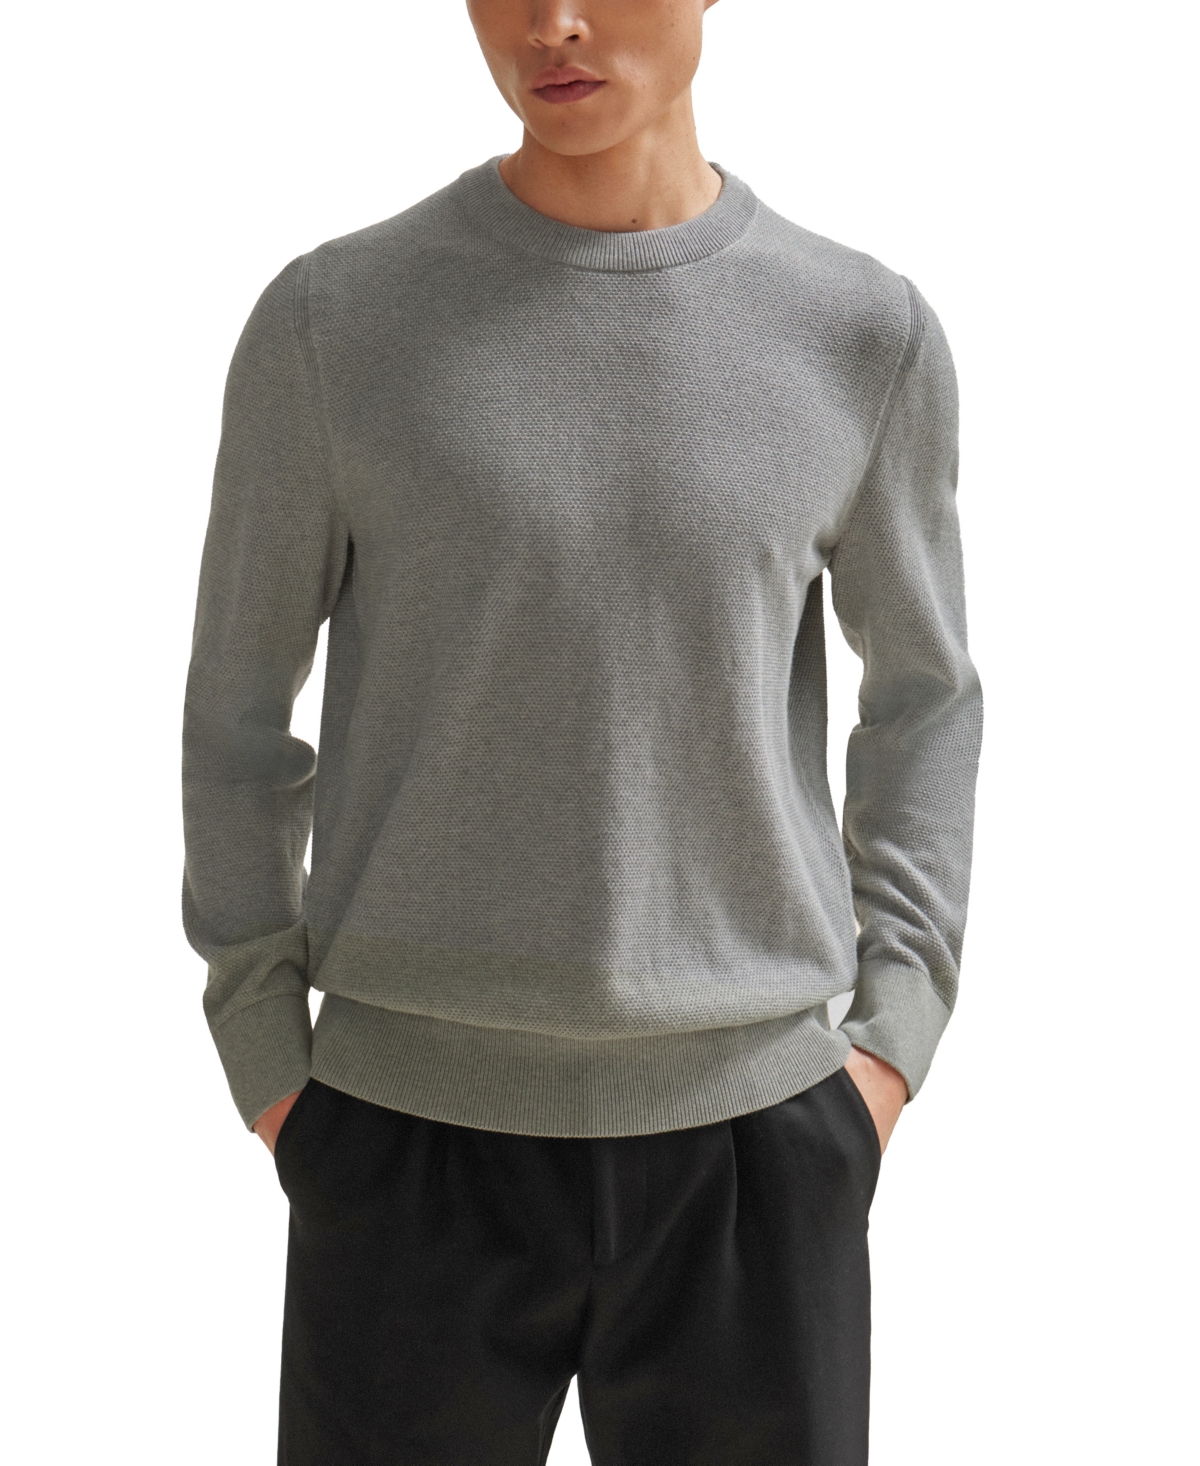 Boss by Hugo Boss Men's Micro-Structured Crew-Neck Sweater - Silver